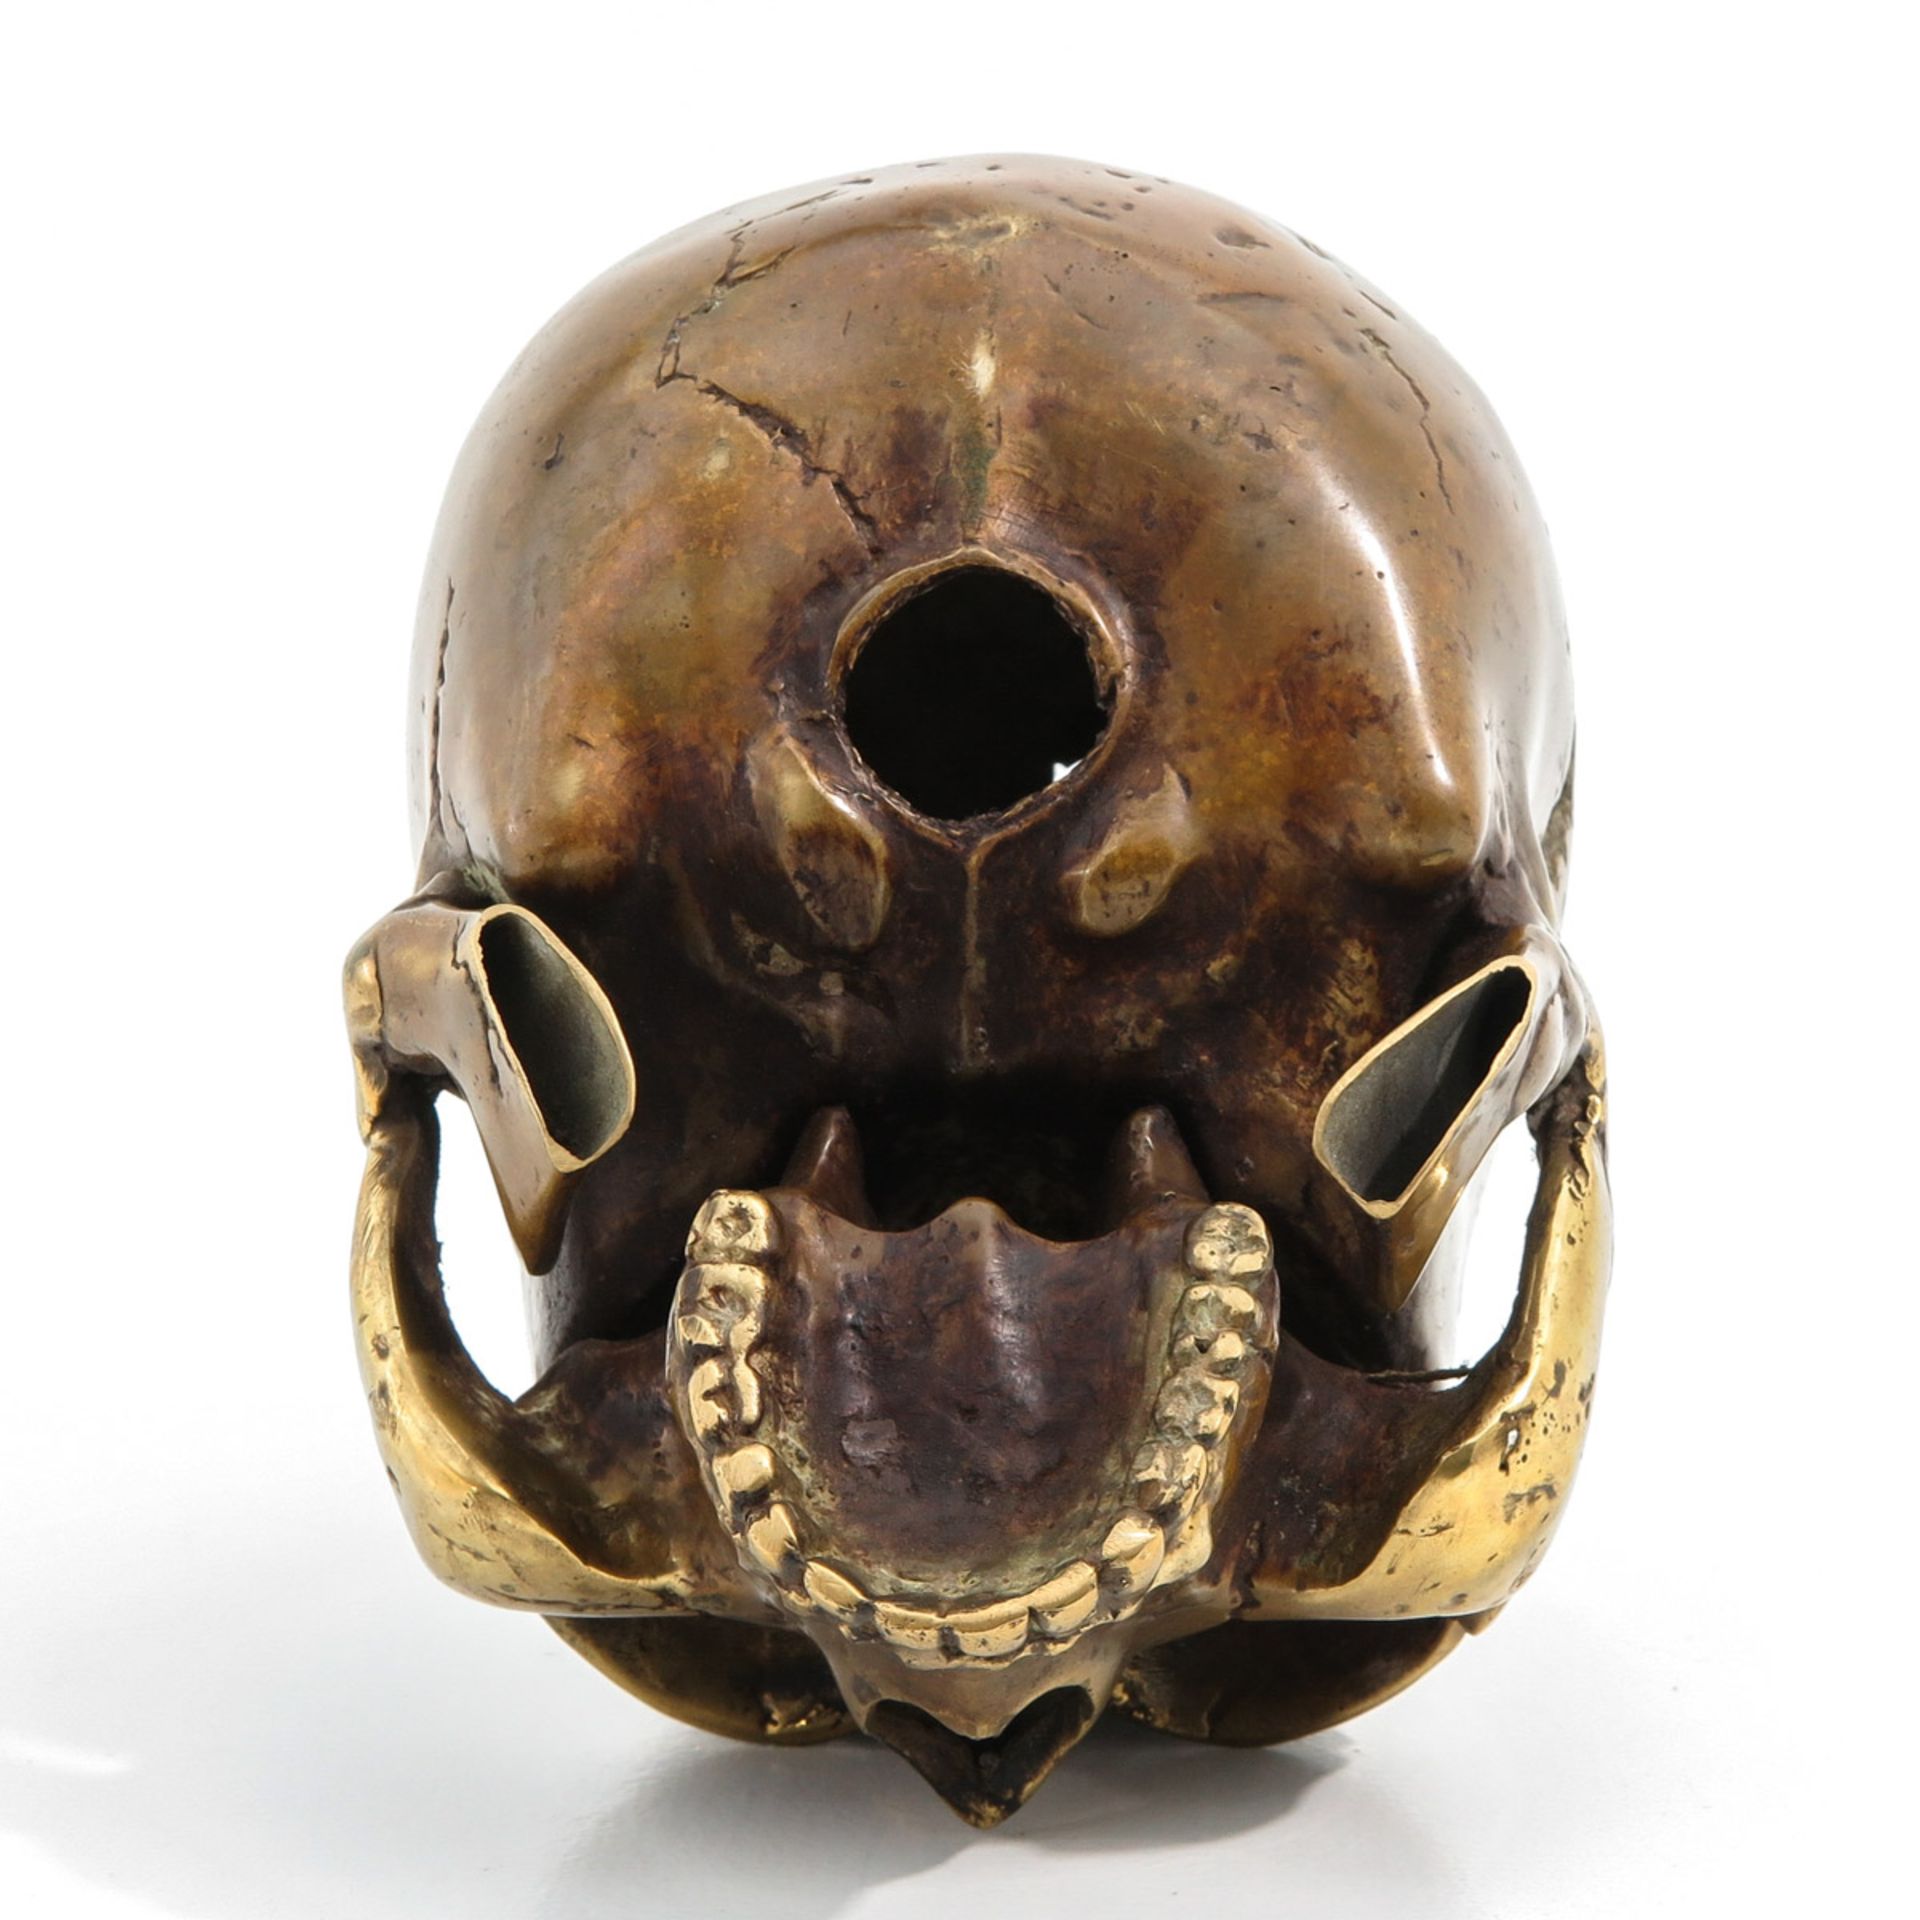 A 19th Century Bronze Sculpture of a Skull - Image 6 of 8